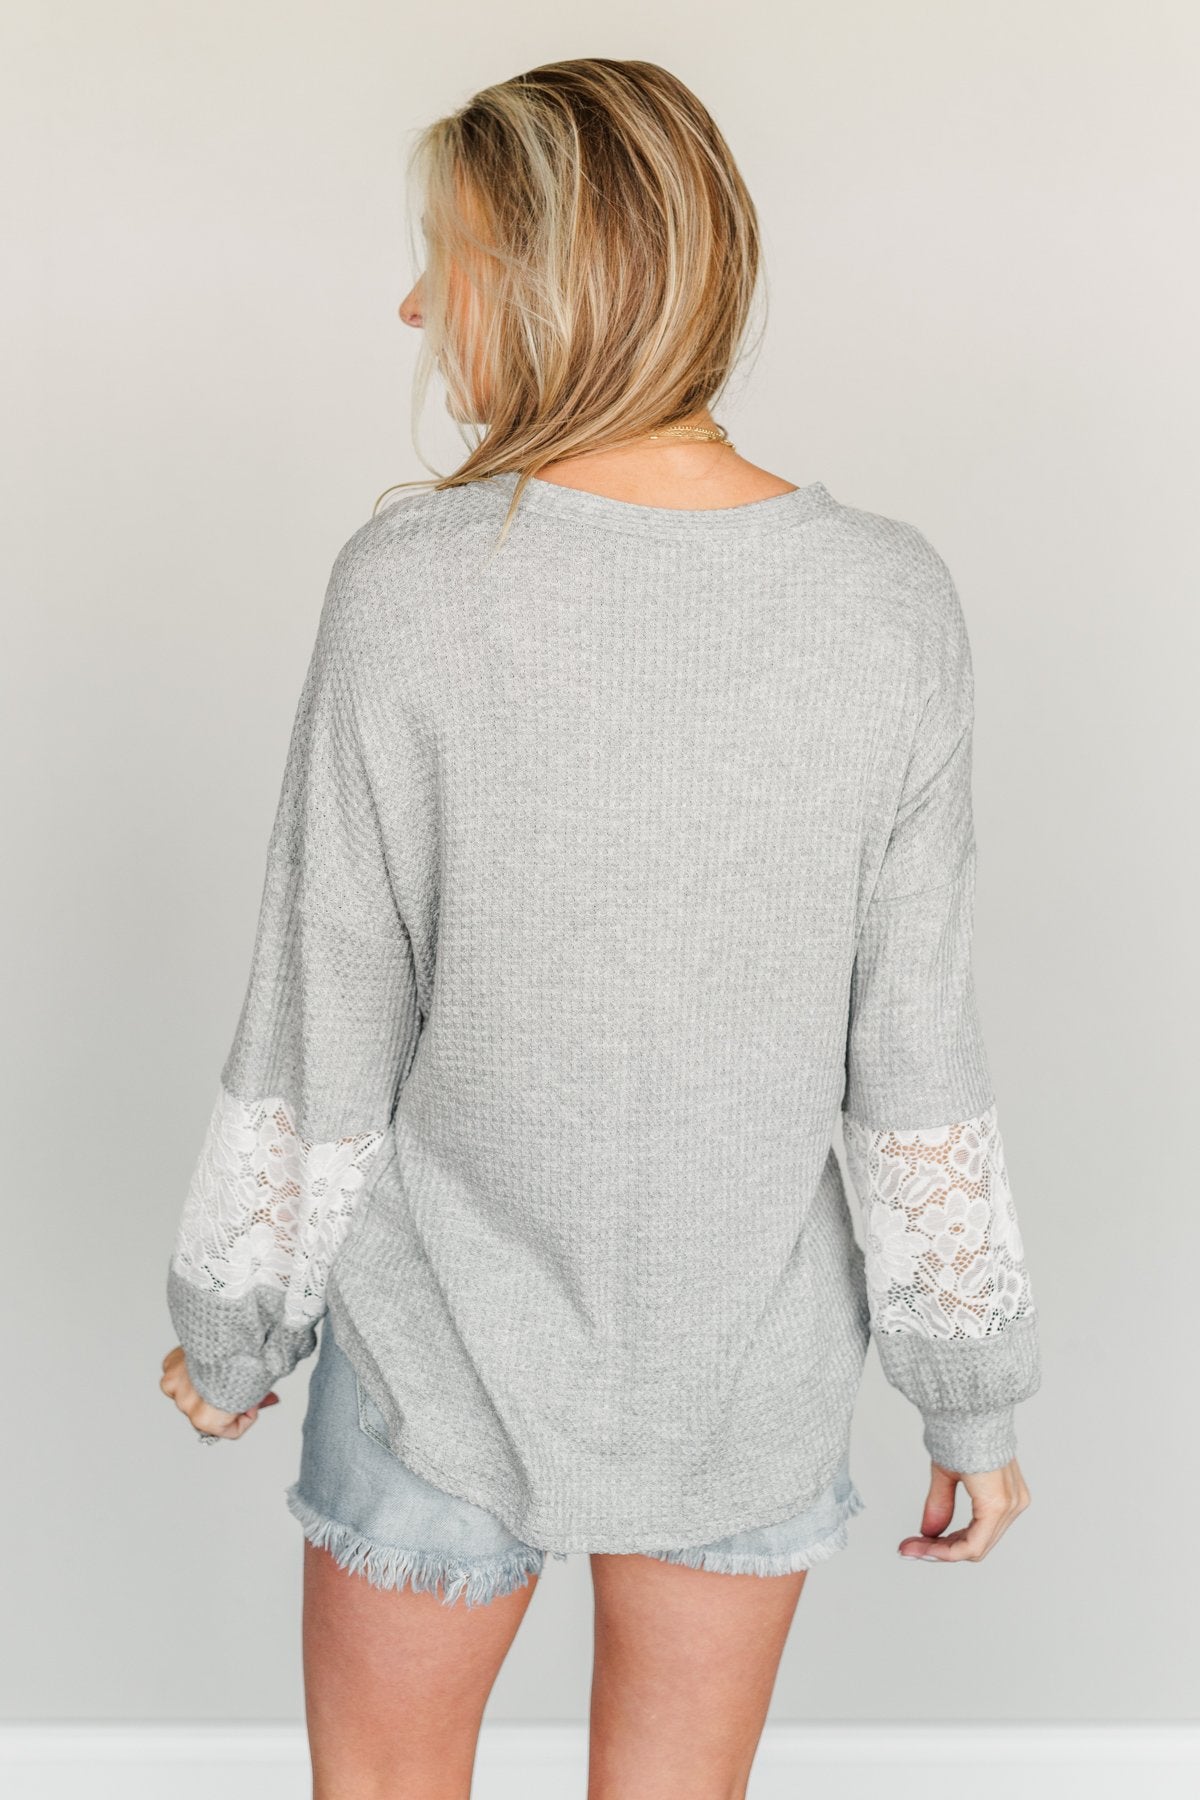 Every Moment Matters Knit Pocket Top- Grey